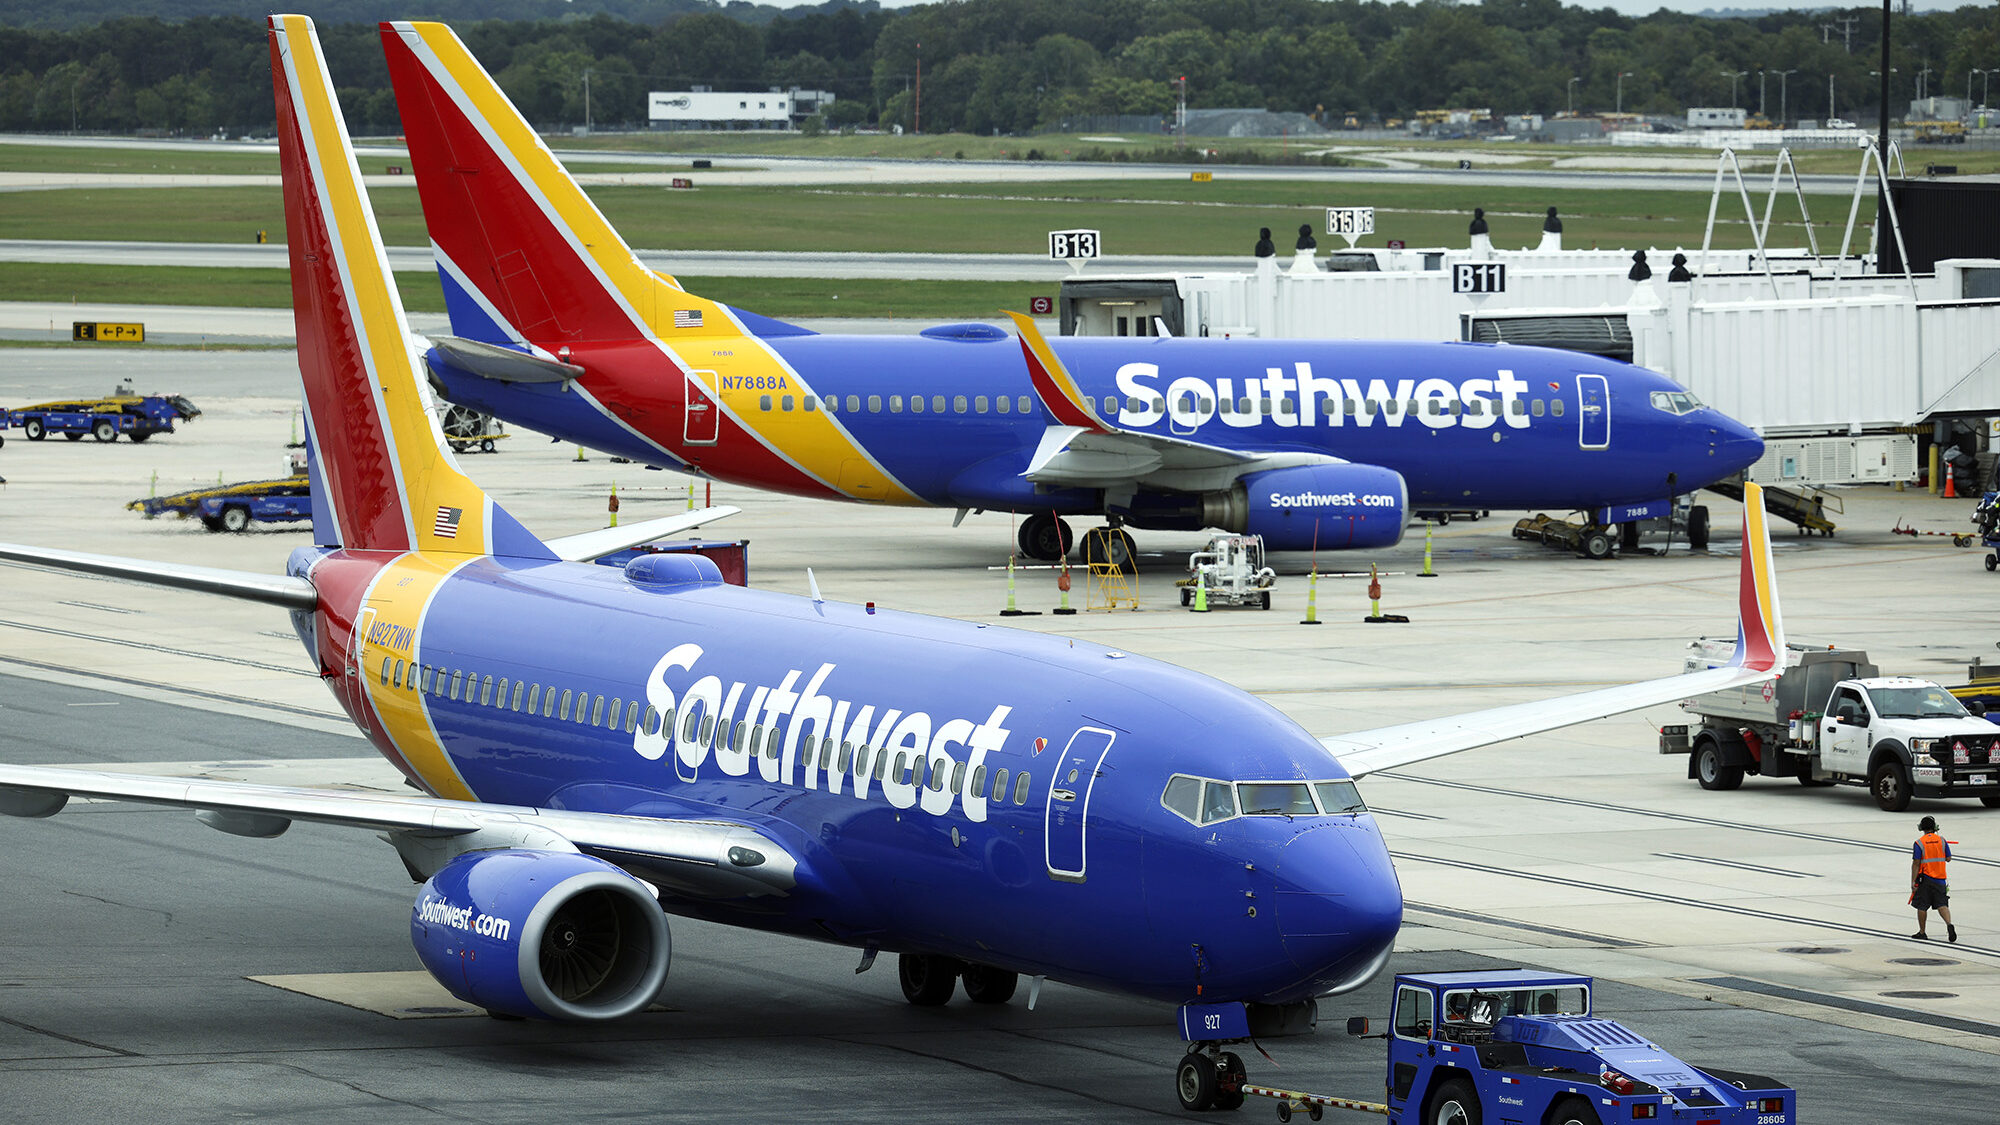 An off-duty pilot stepped in to help after a Southwest pilot became ill during a flight, the airlin...